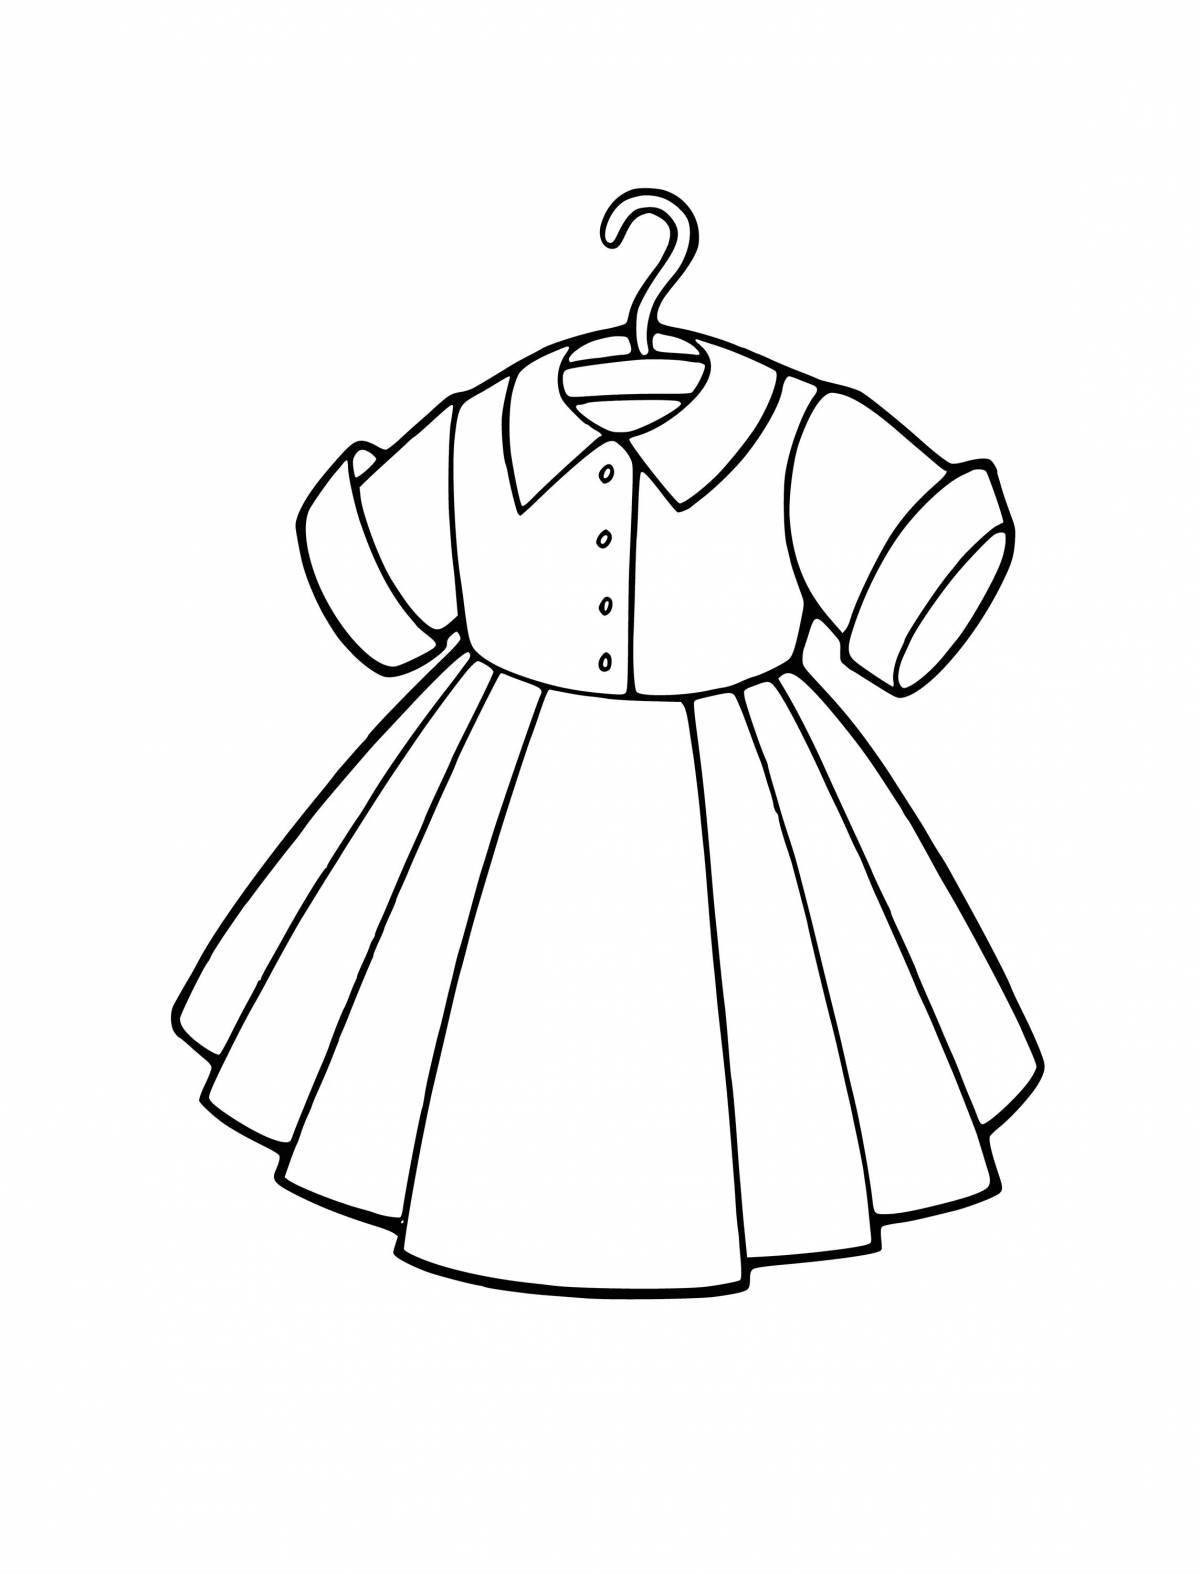 Adorable coloring dress for 5-6 year olds